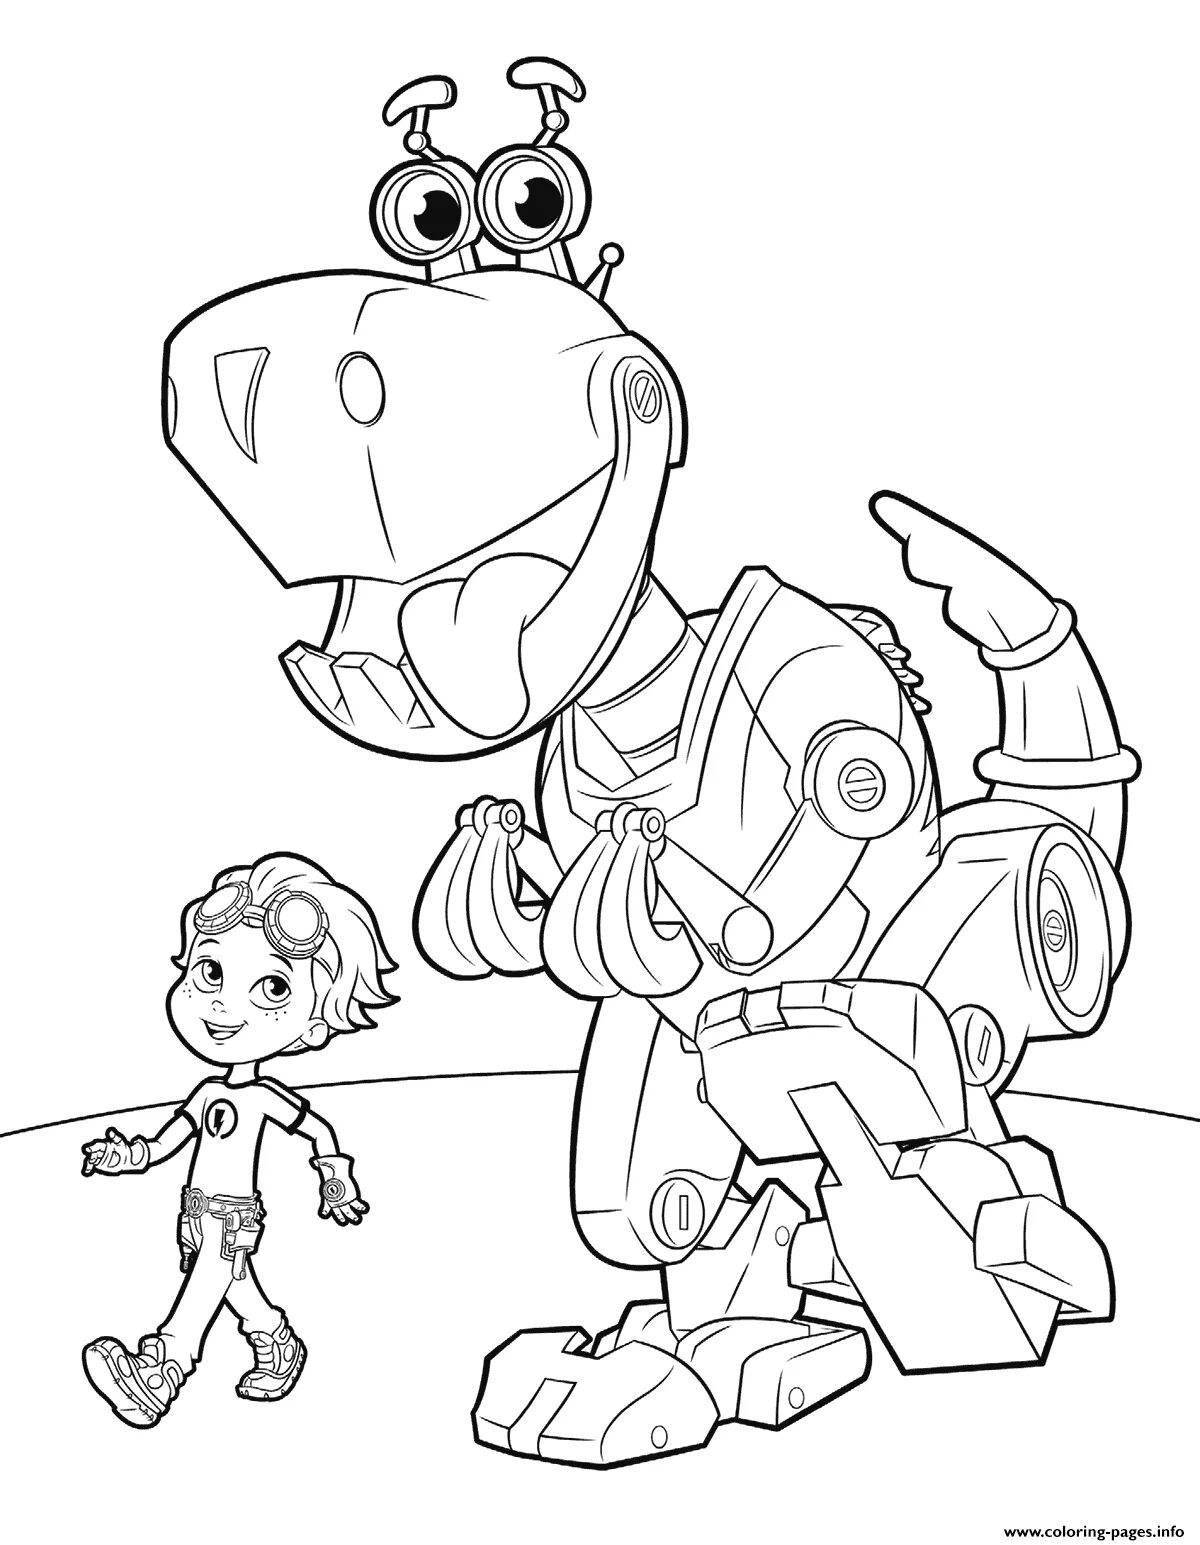 Cute robot coloring book for kids